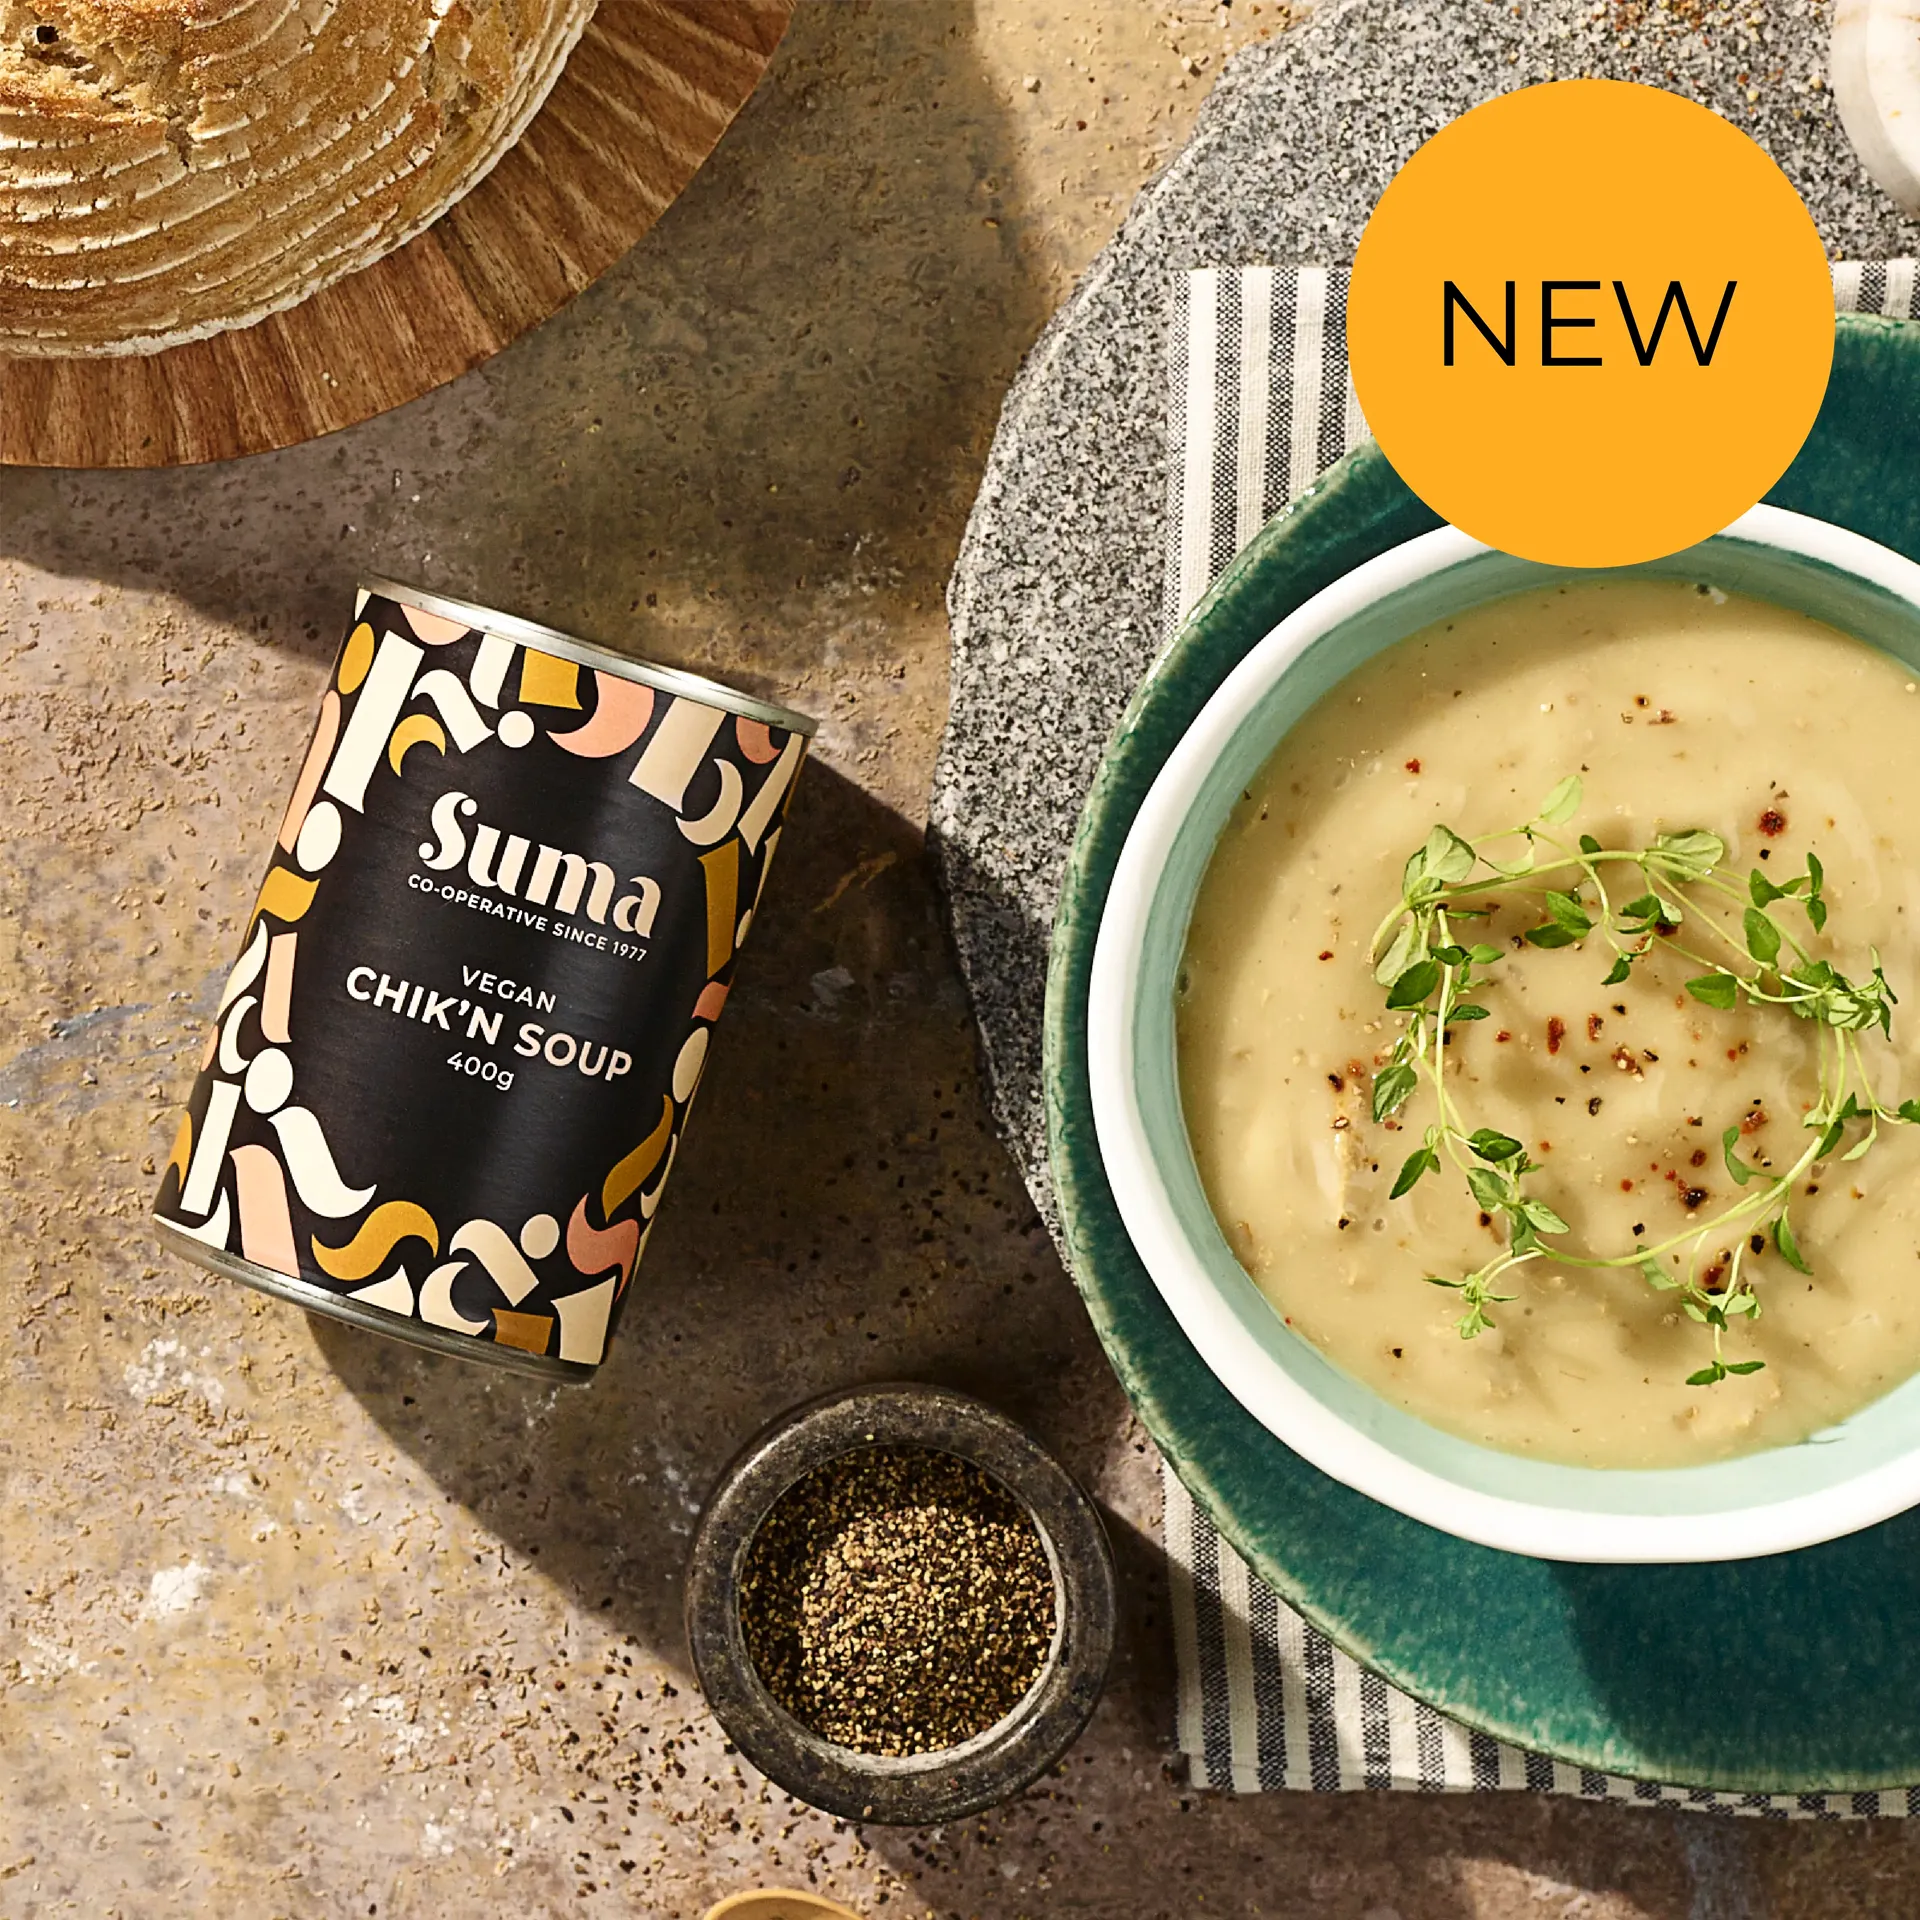 Suma's New Chick'n Soup